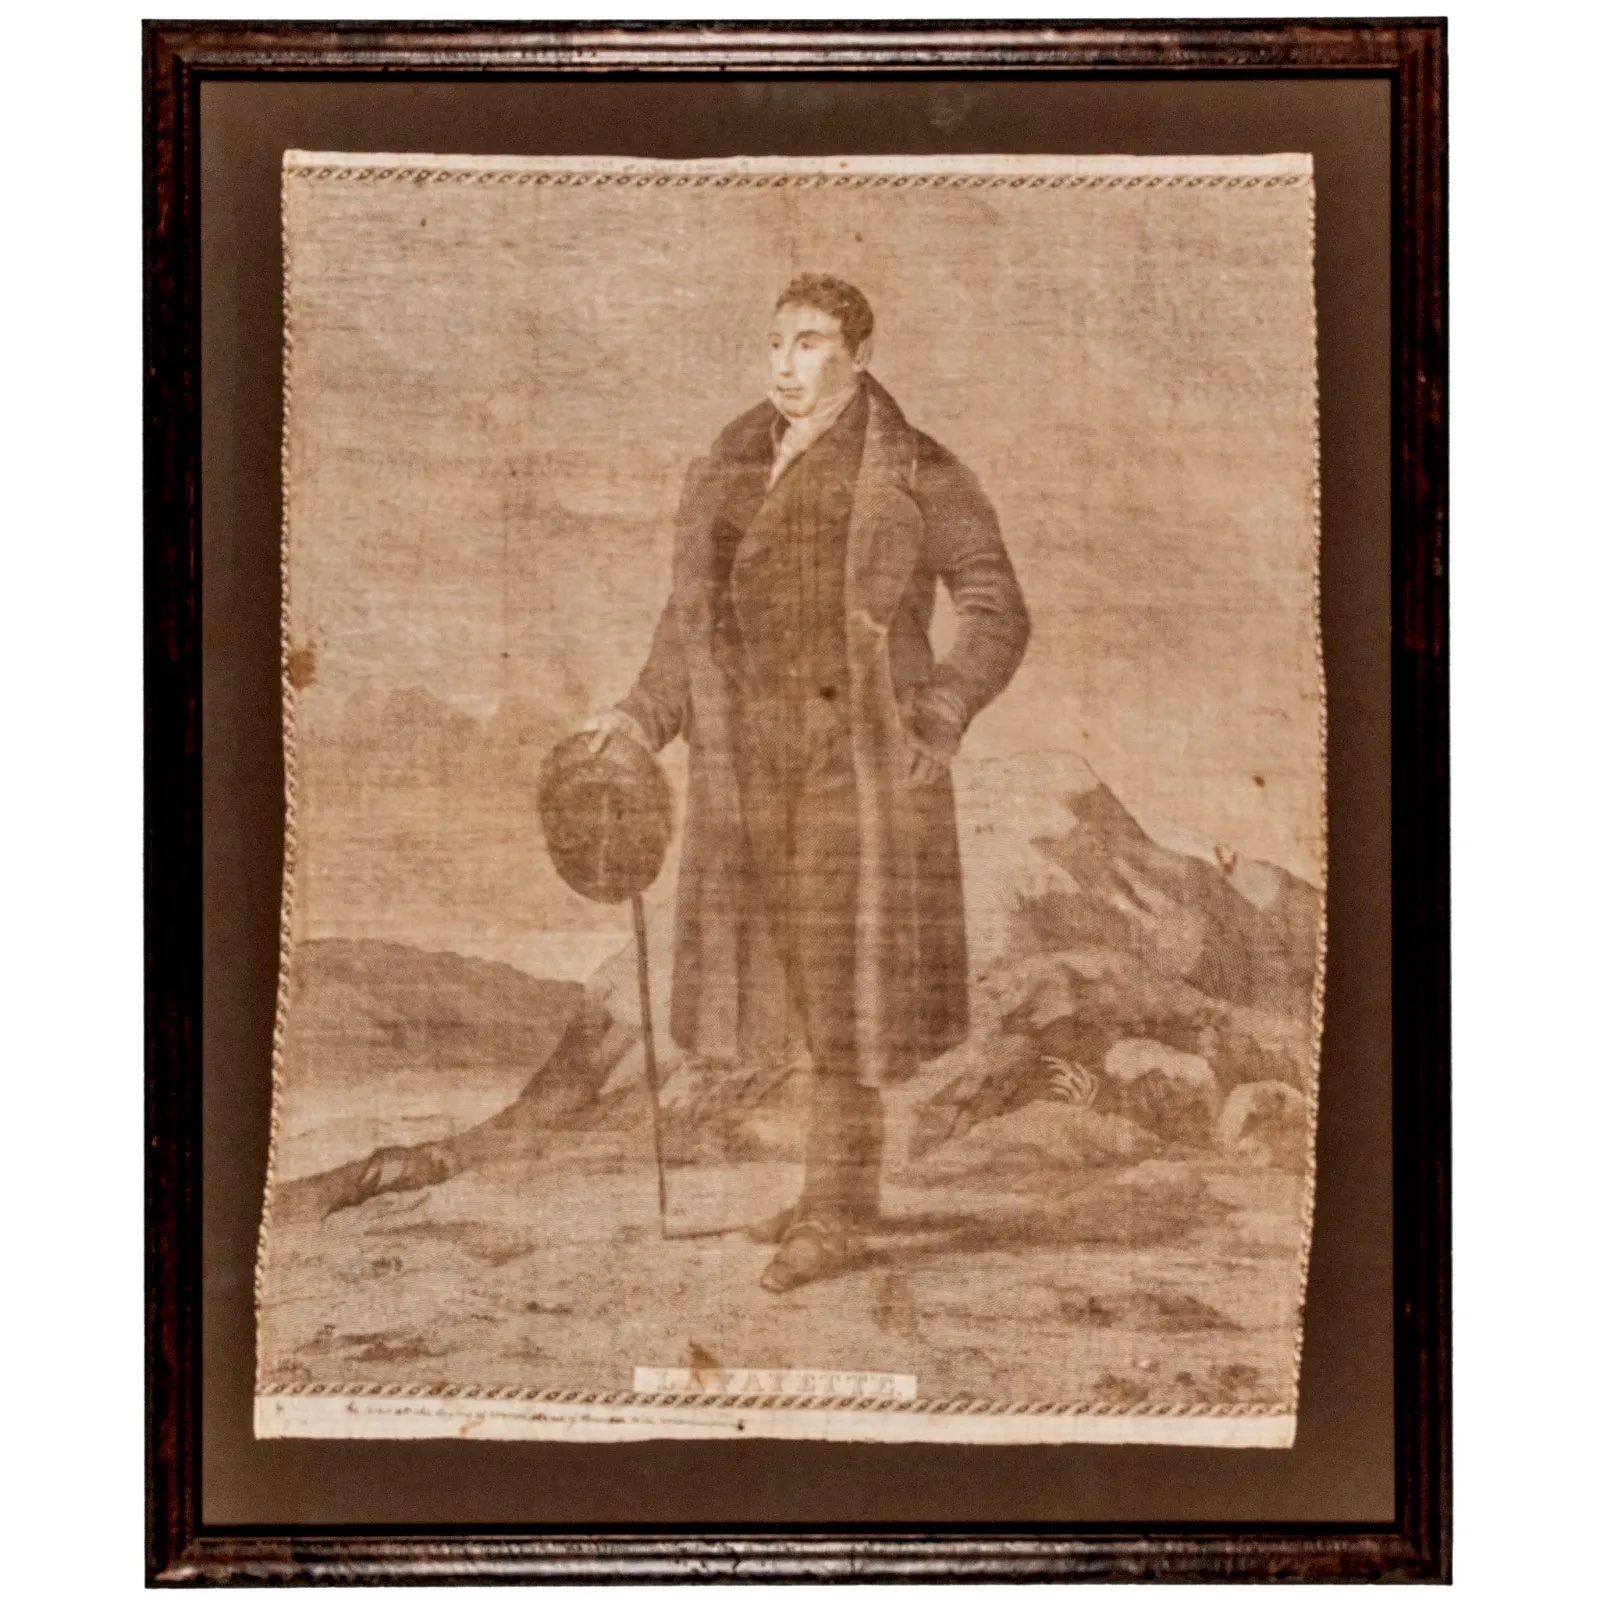 French General Gilbert du Motier, Marquis de Lafayette portrait textile, estimated at $4,500-$6,500 at Early American.